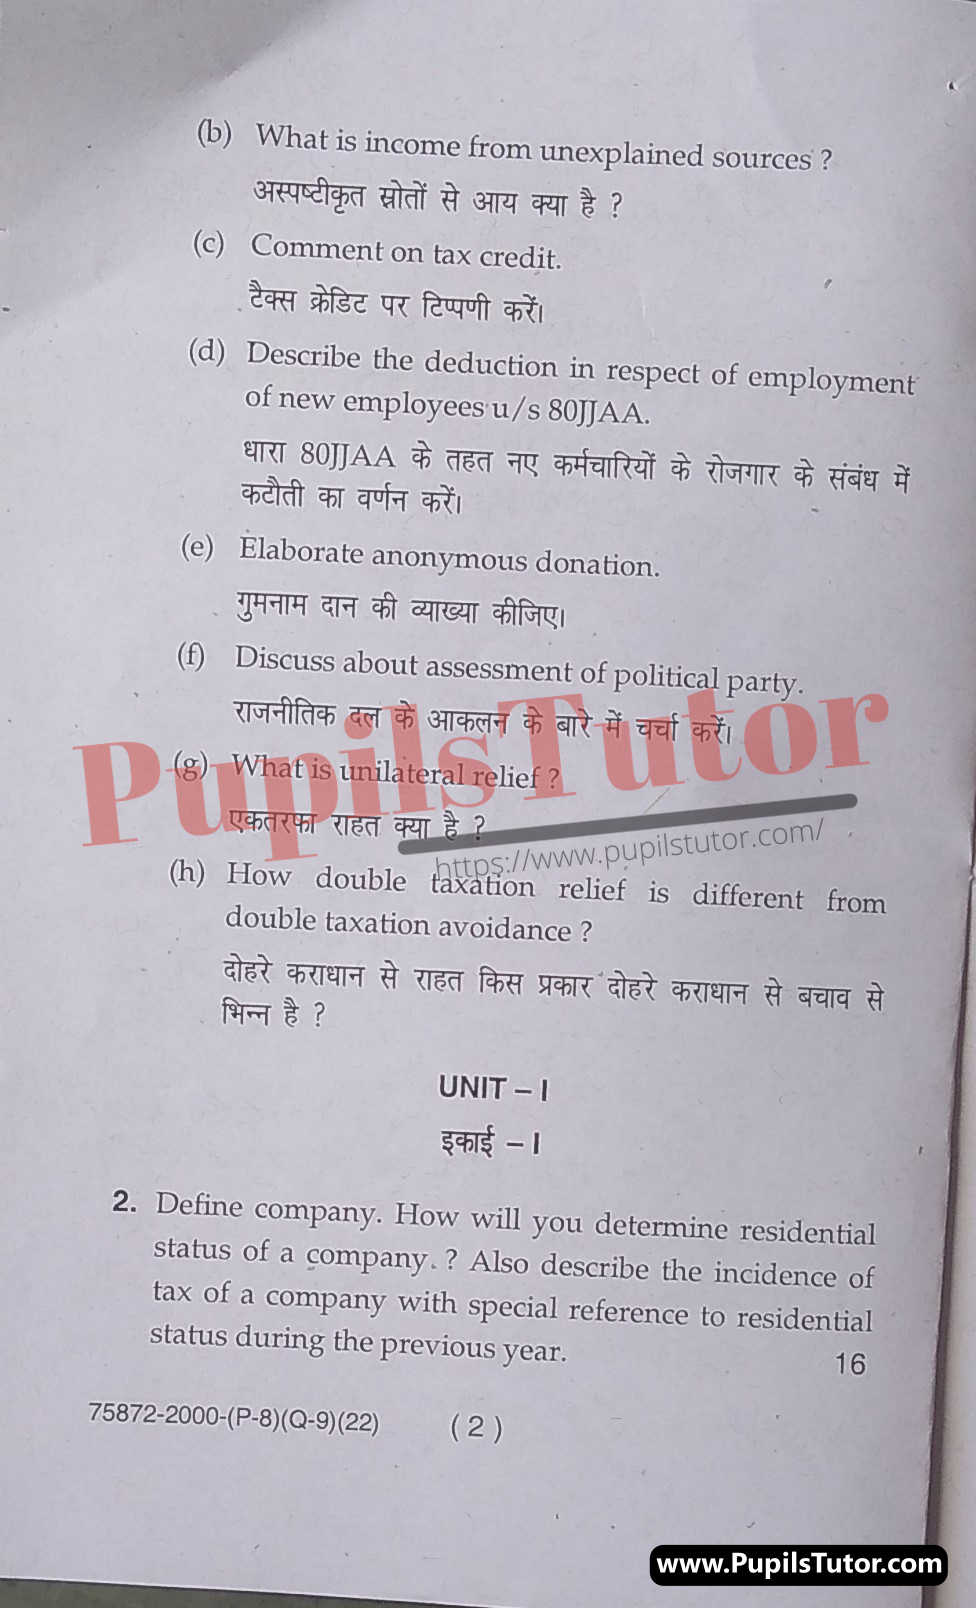 M.D. University M.Com. Corporate Tax Third Semester Important Question Answer And Solution - www.pupilstutor.com (Paper Page Number 2)